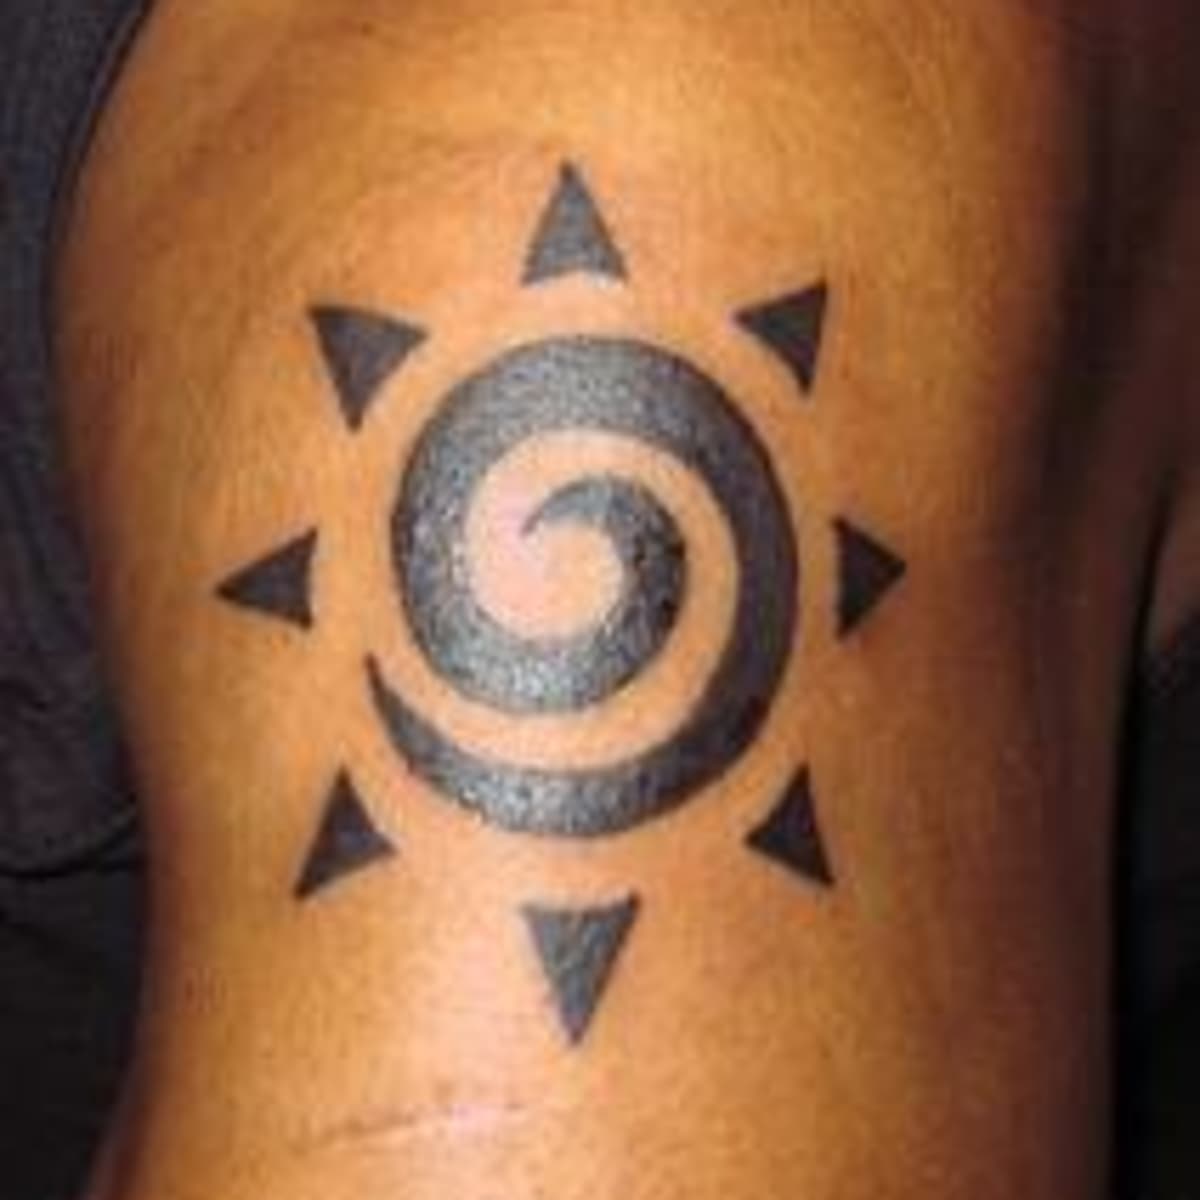 tribal symbol tattoos and their meanings